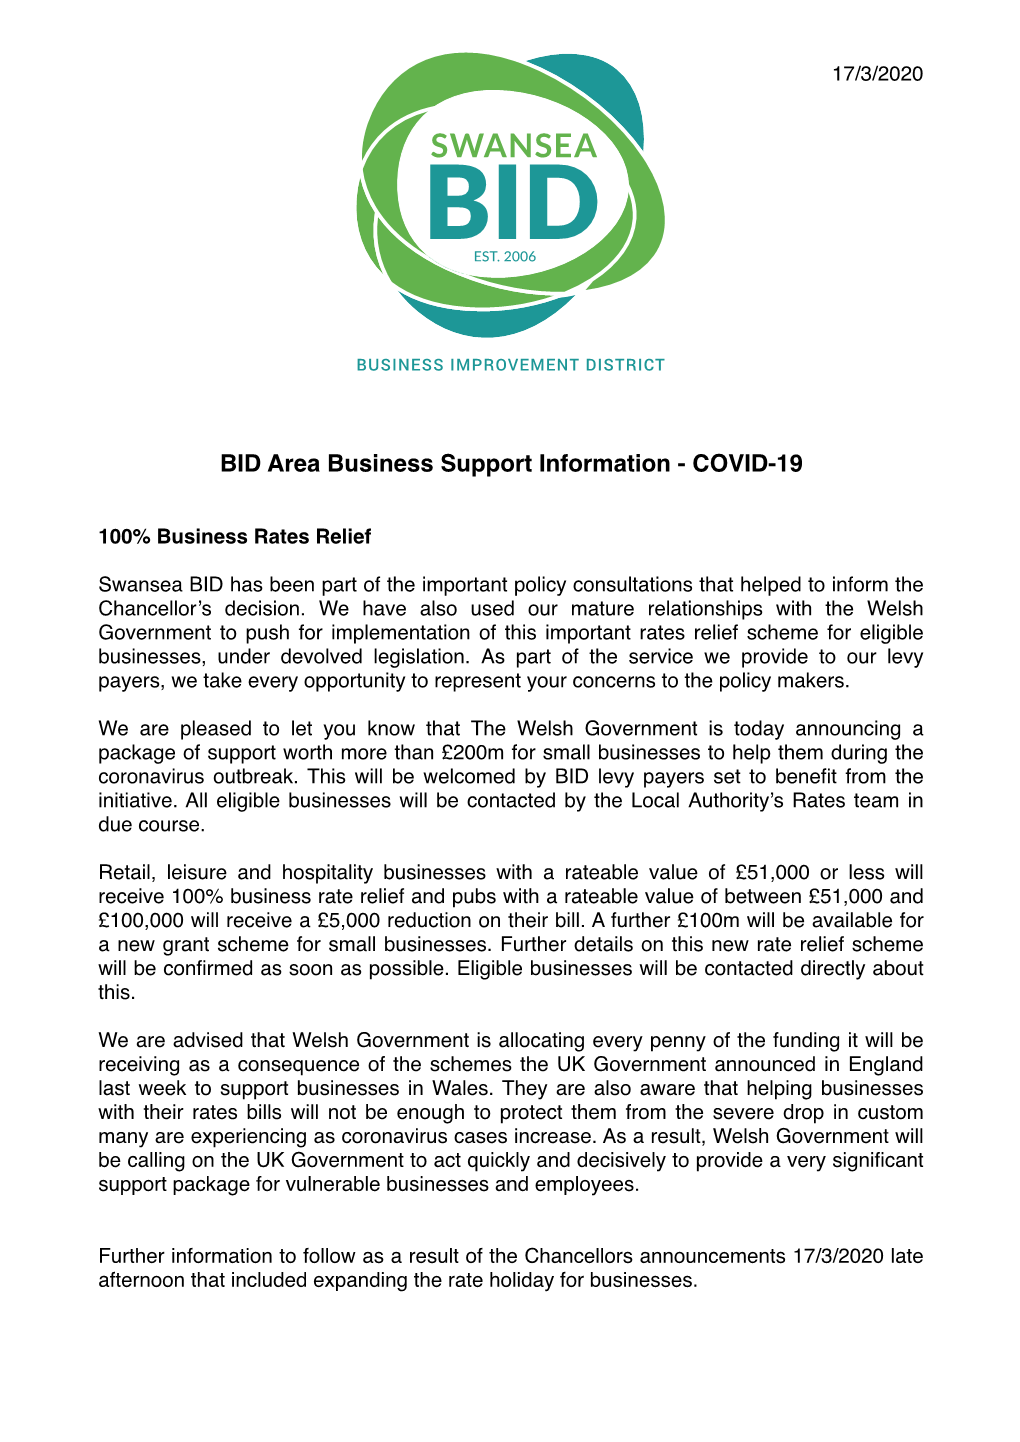 BID Area Business Support Information - COVID-19